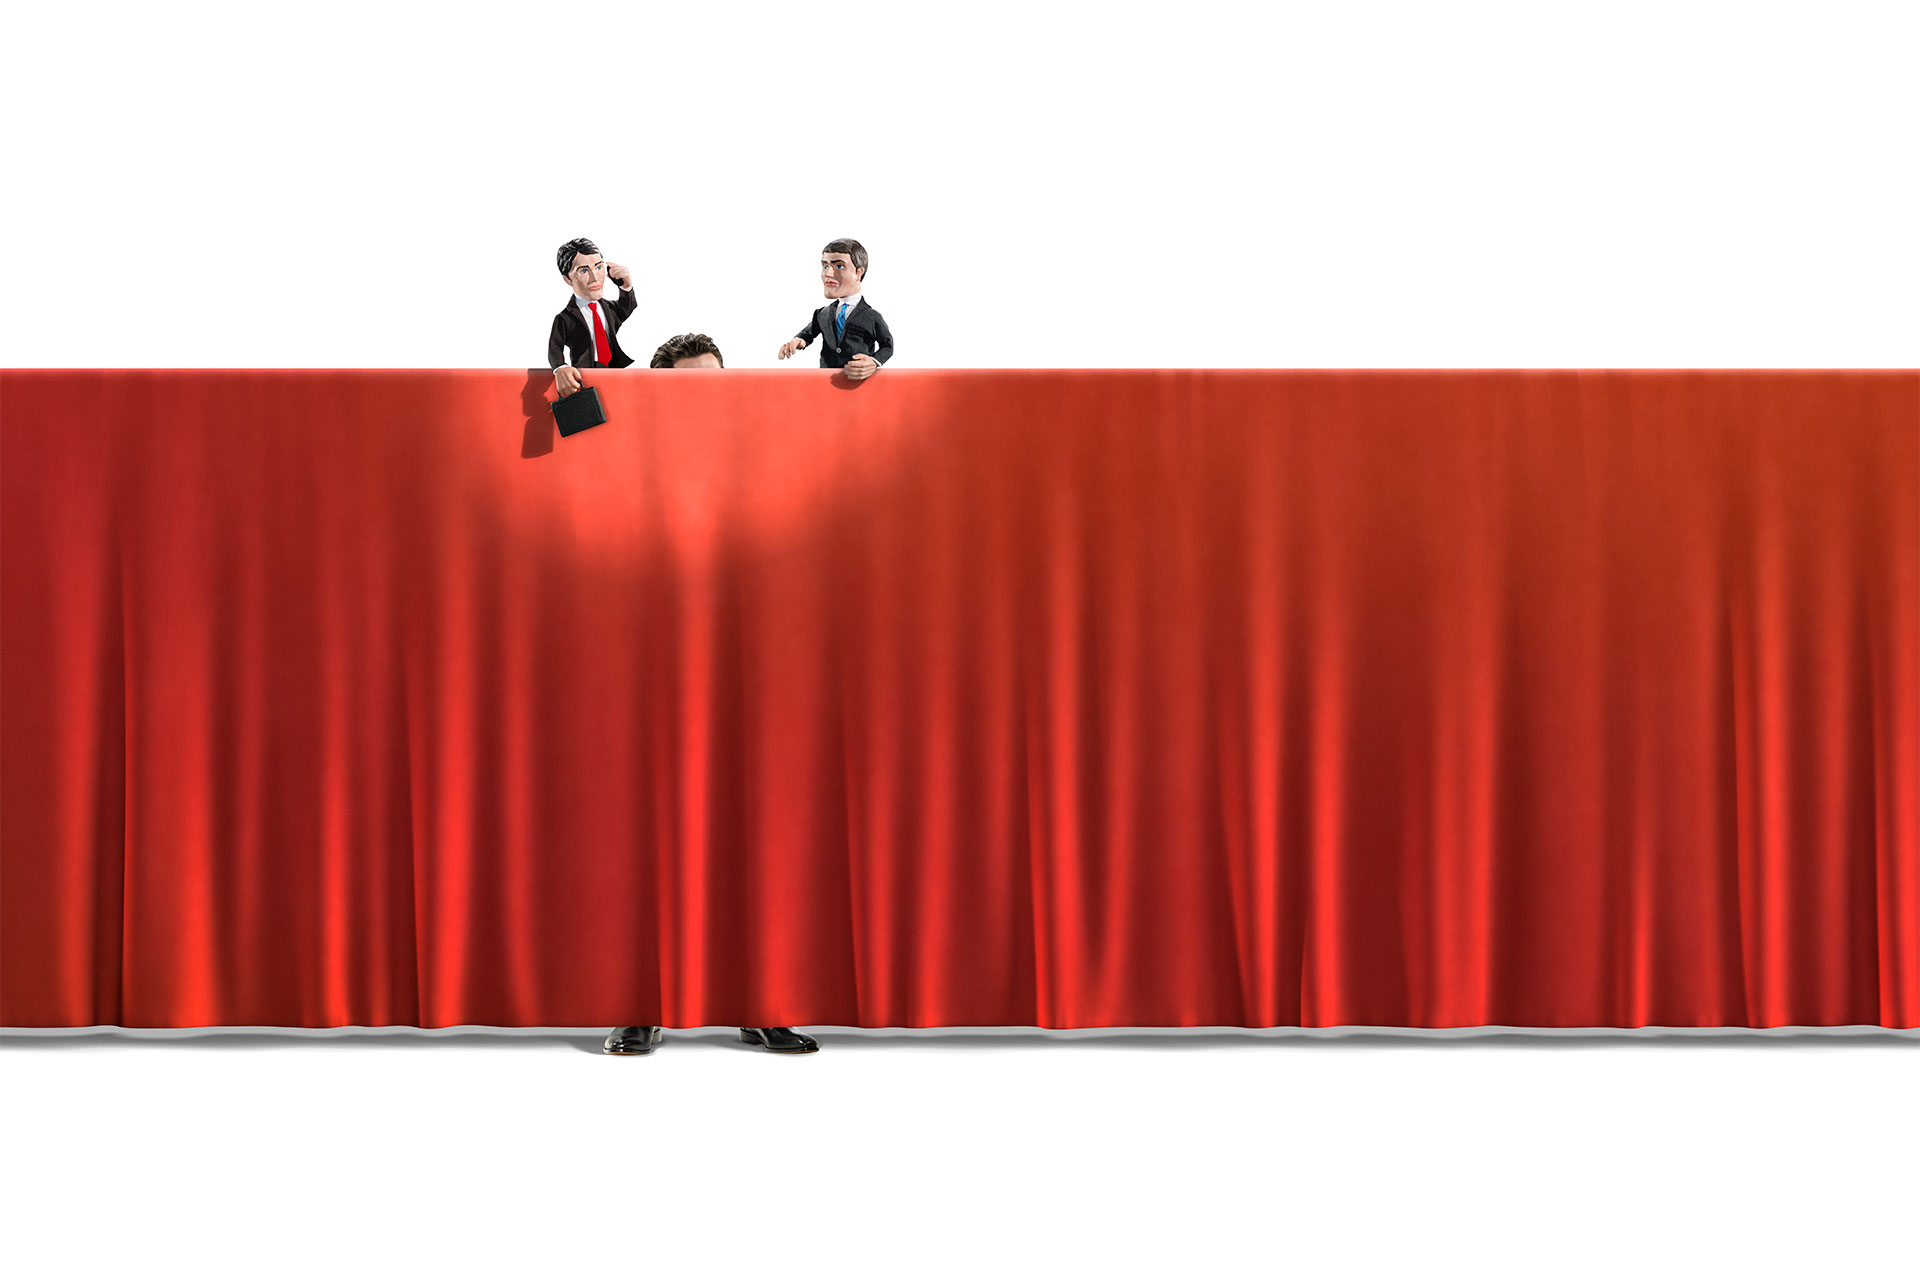 A wide red curtain serves as a stage for a Punch and Judy Theatre. A man standing behind the curtain operates two puppets looking like businessmen.